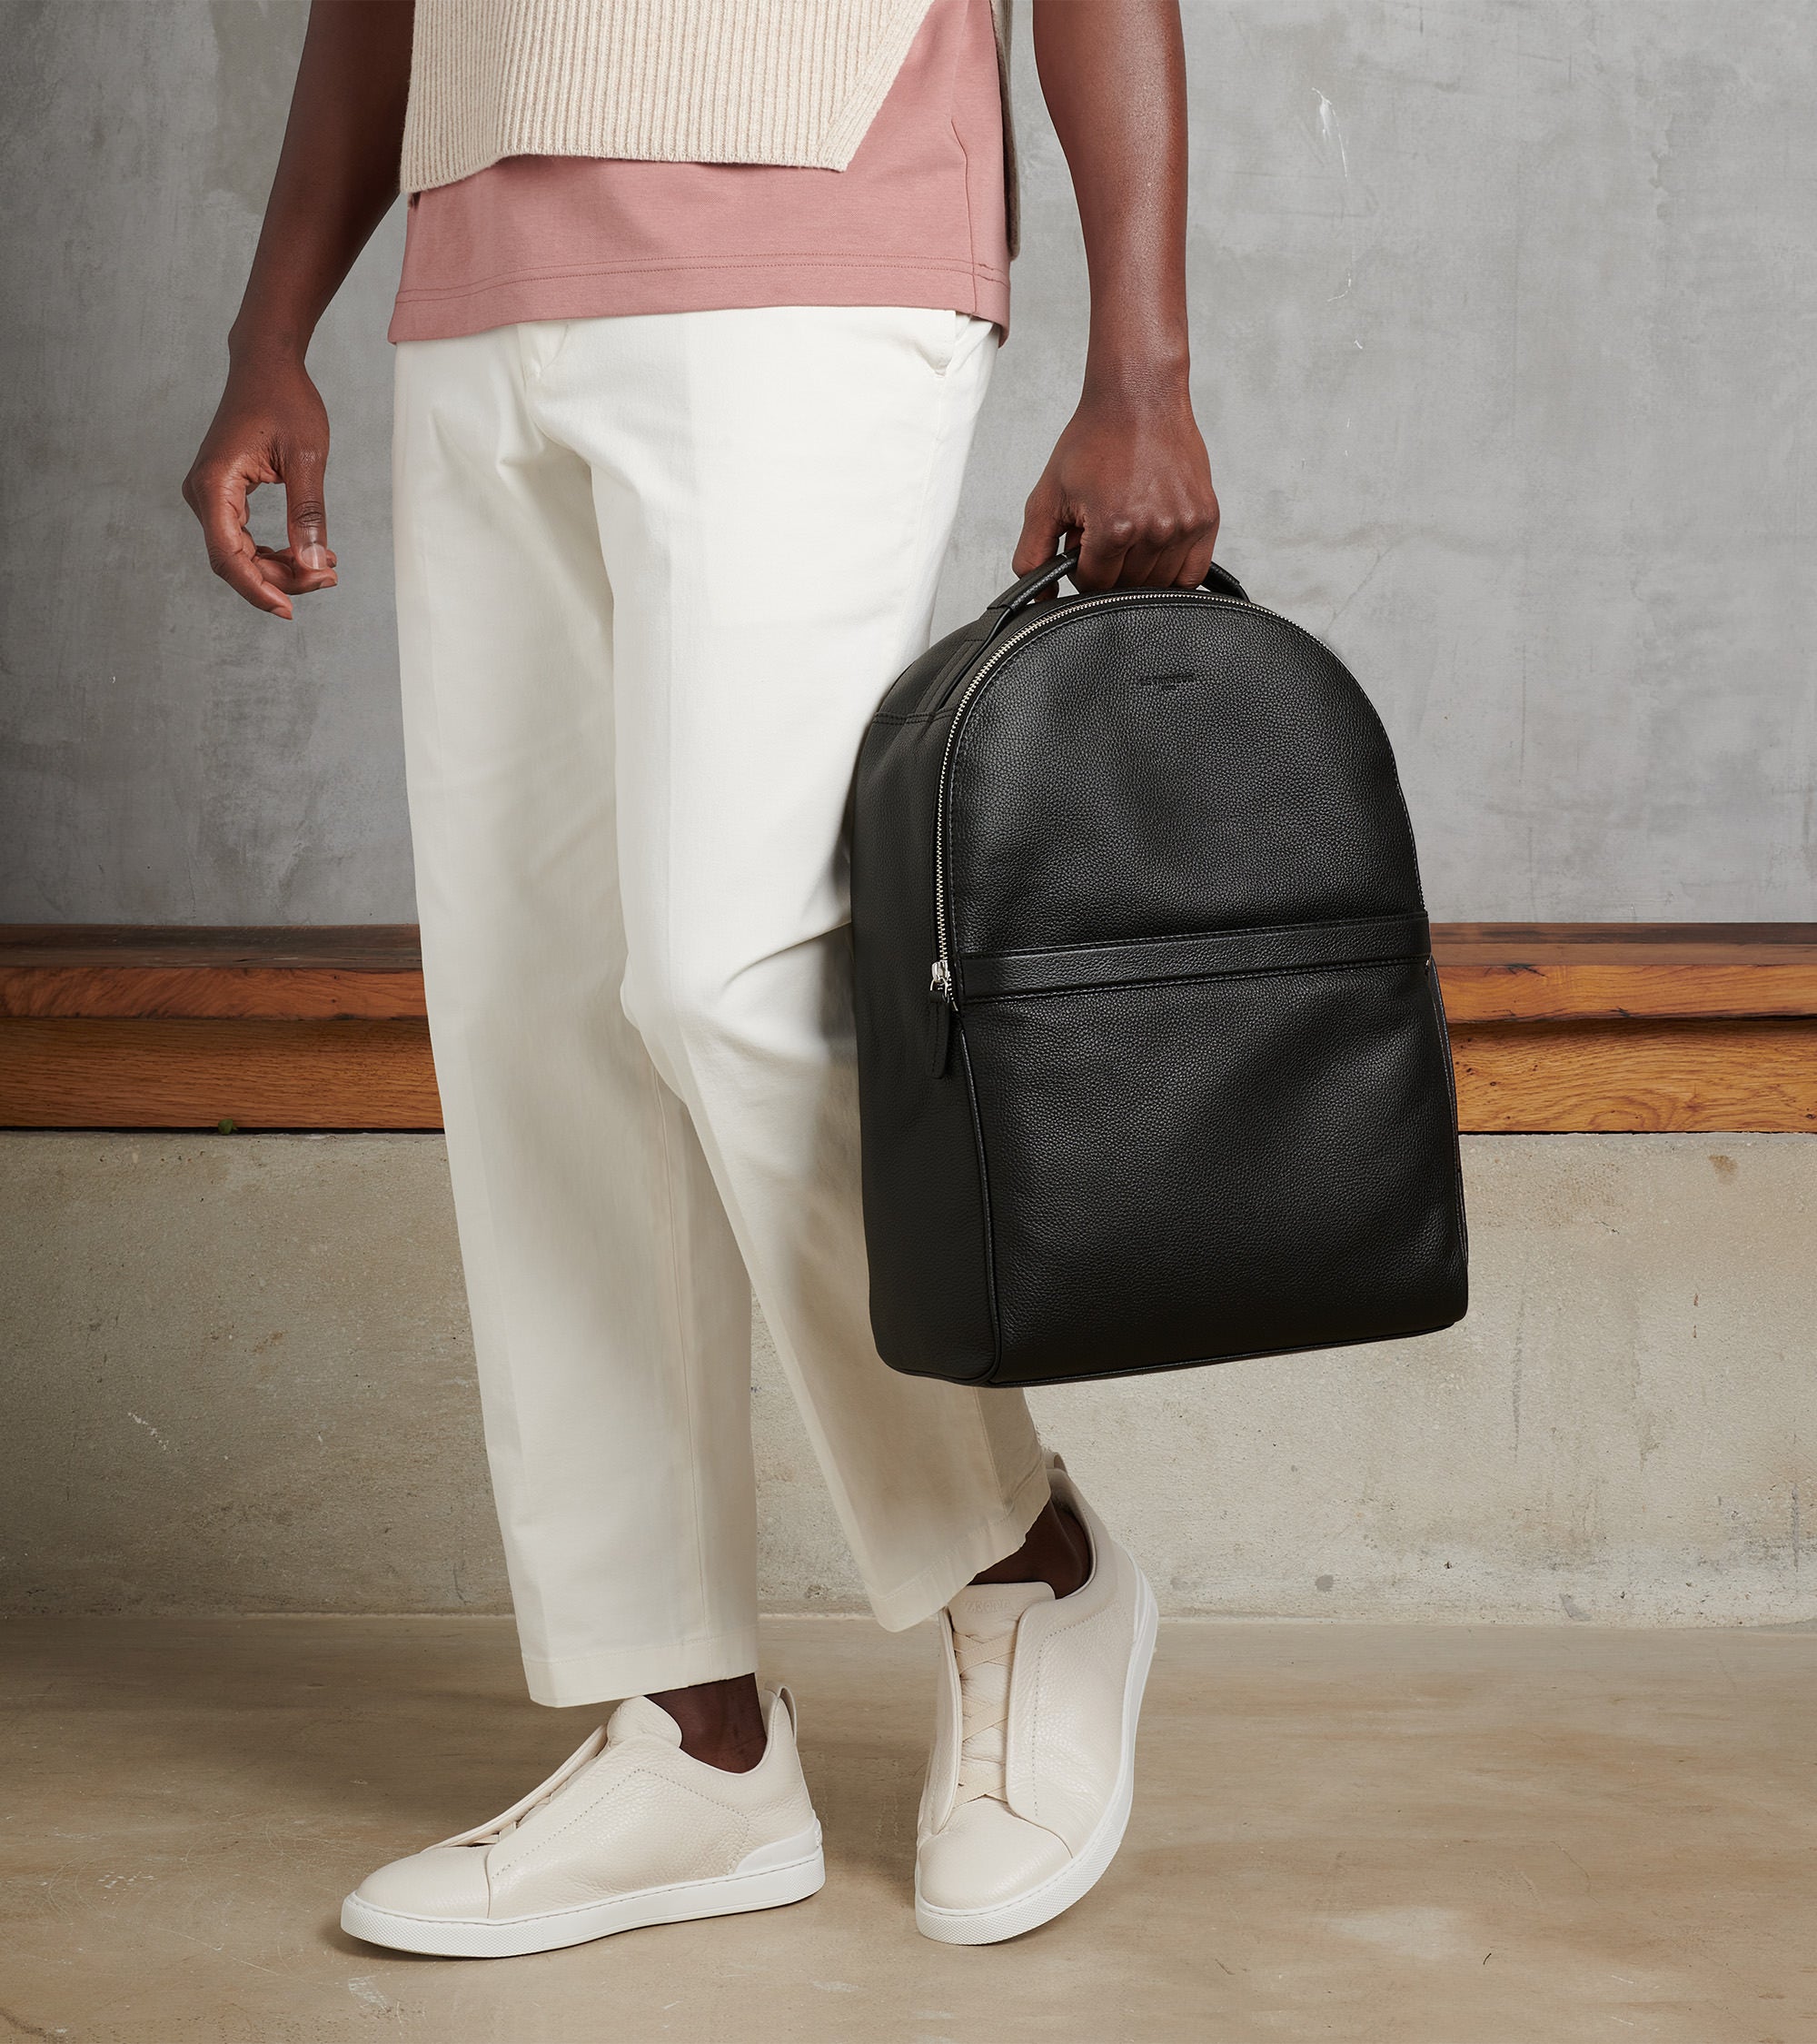 Zipped Charles pebbled leather backpack